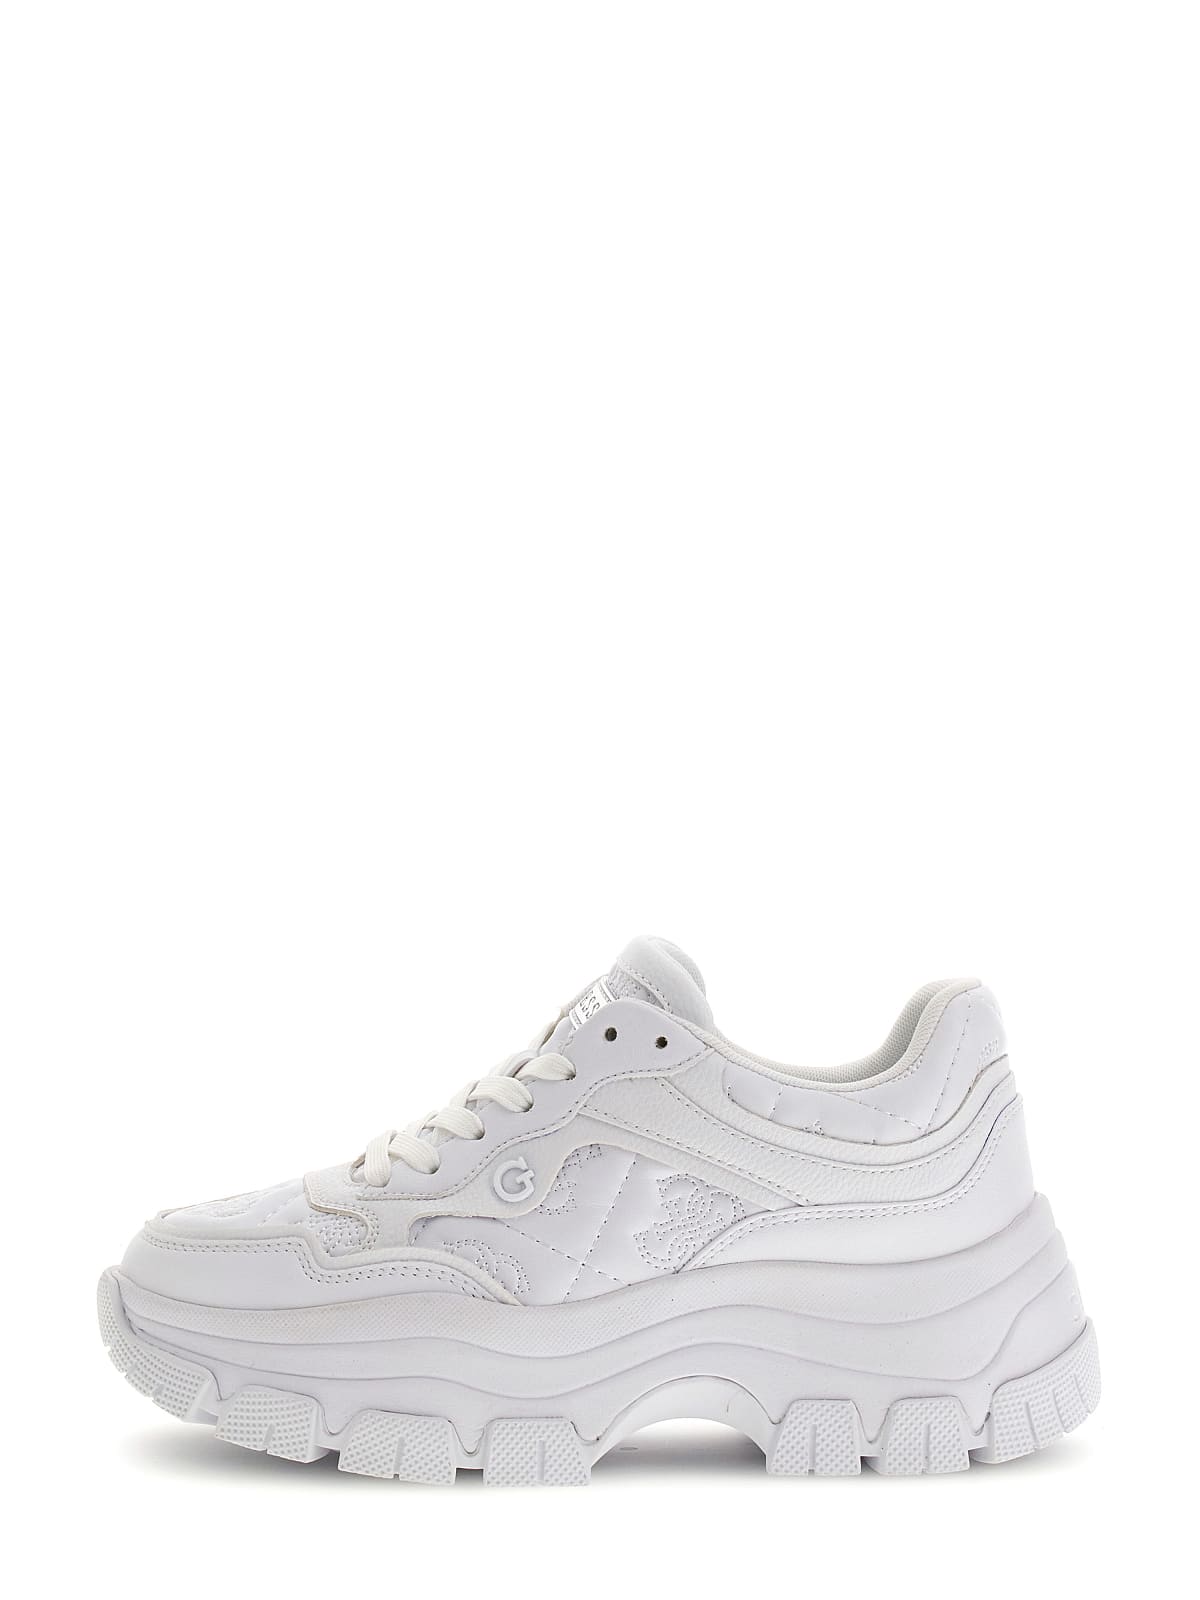 Sneakers Guess Donna runner brecky Bianco